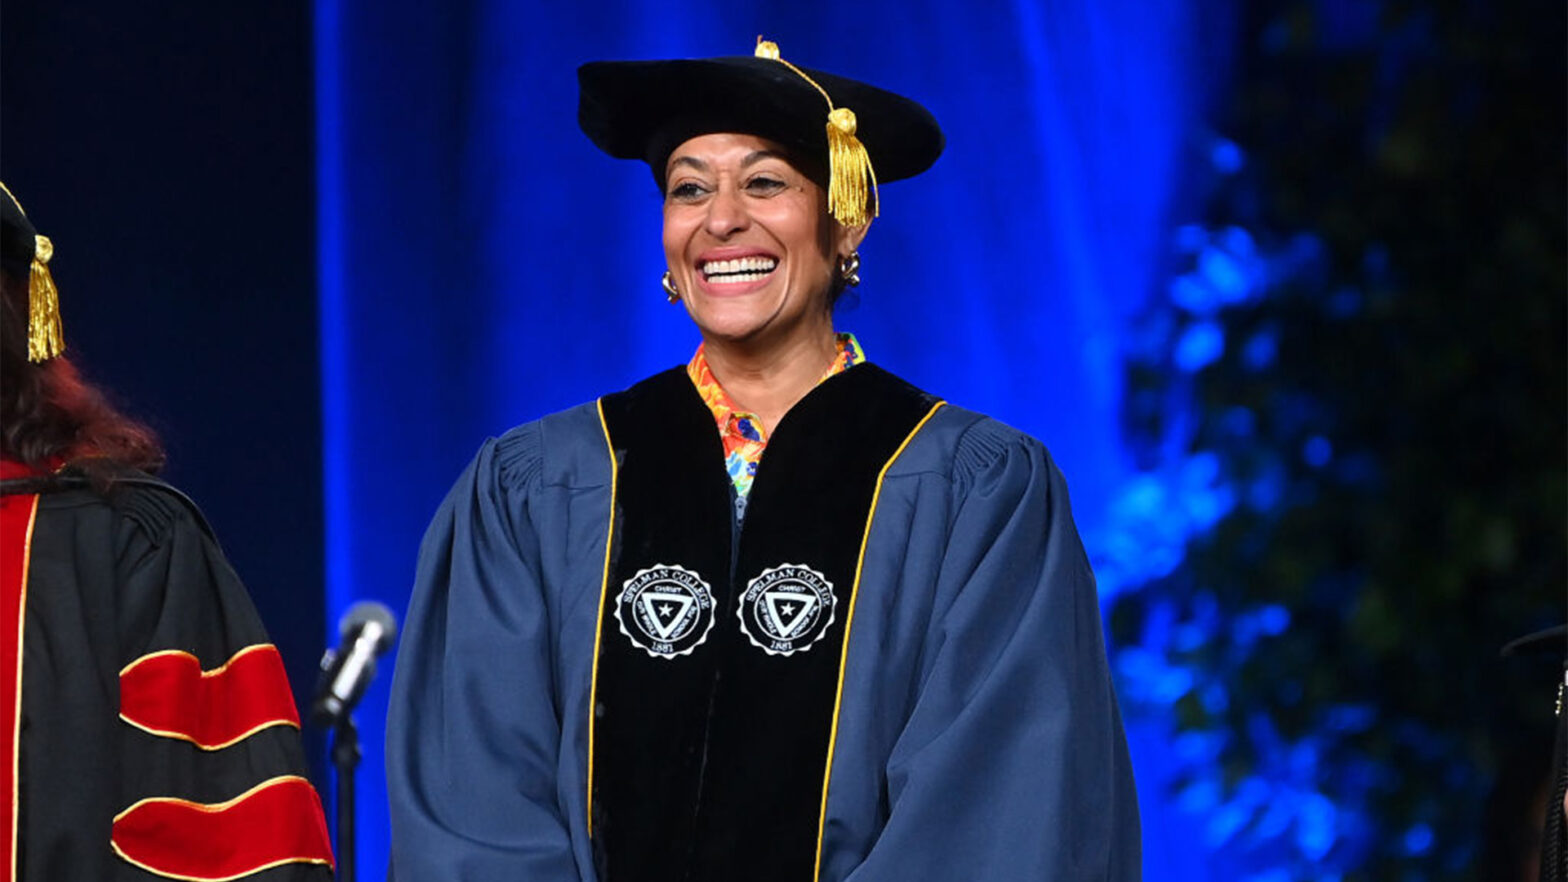 Tracee Ellis Ross Celebrates Honorary Doctorate Degree From HBCU — 'I Became A Spelmanite Today'